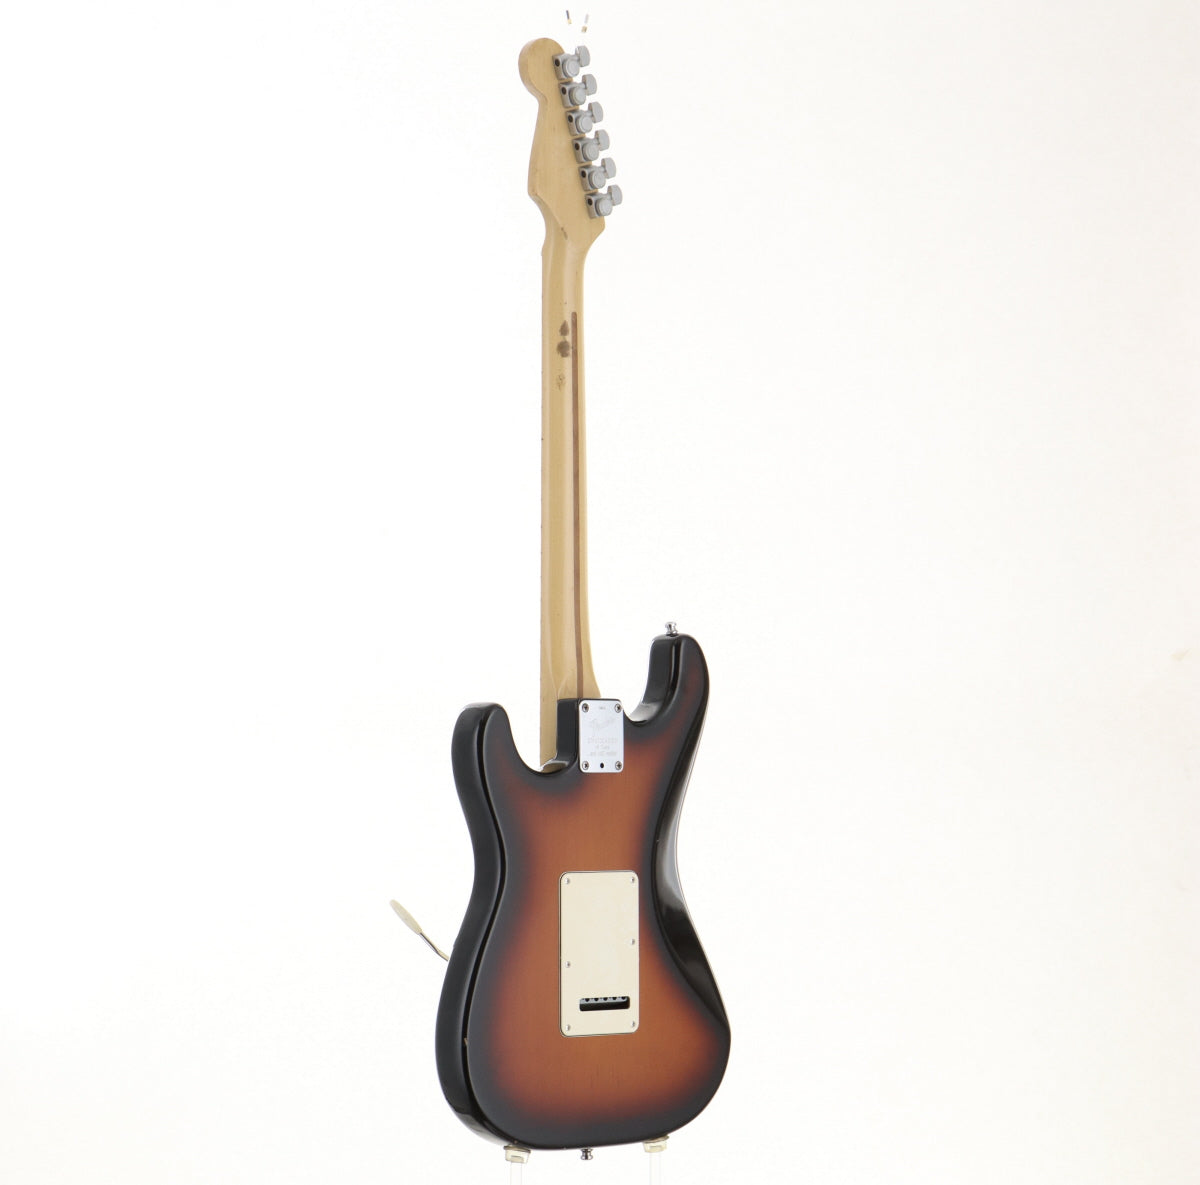 [SN N4172644] USED Fender / 40th Anniversary American Standard Stratocaster Modified 3-Color Sunburst [09]